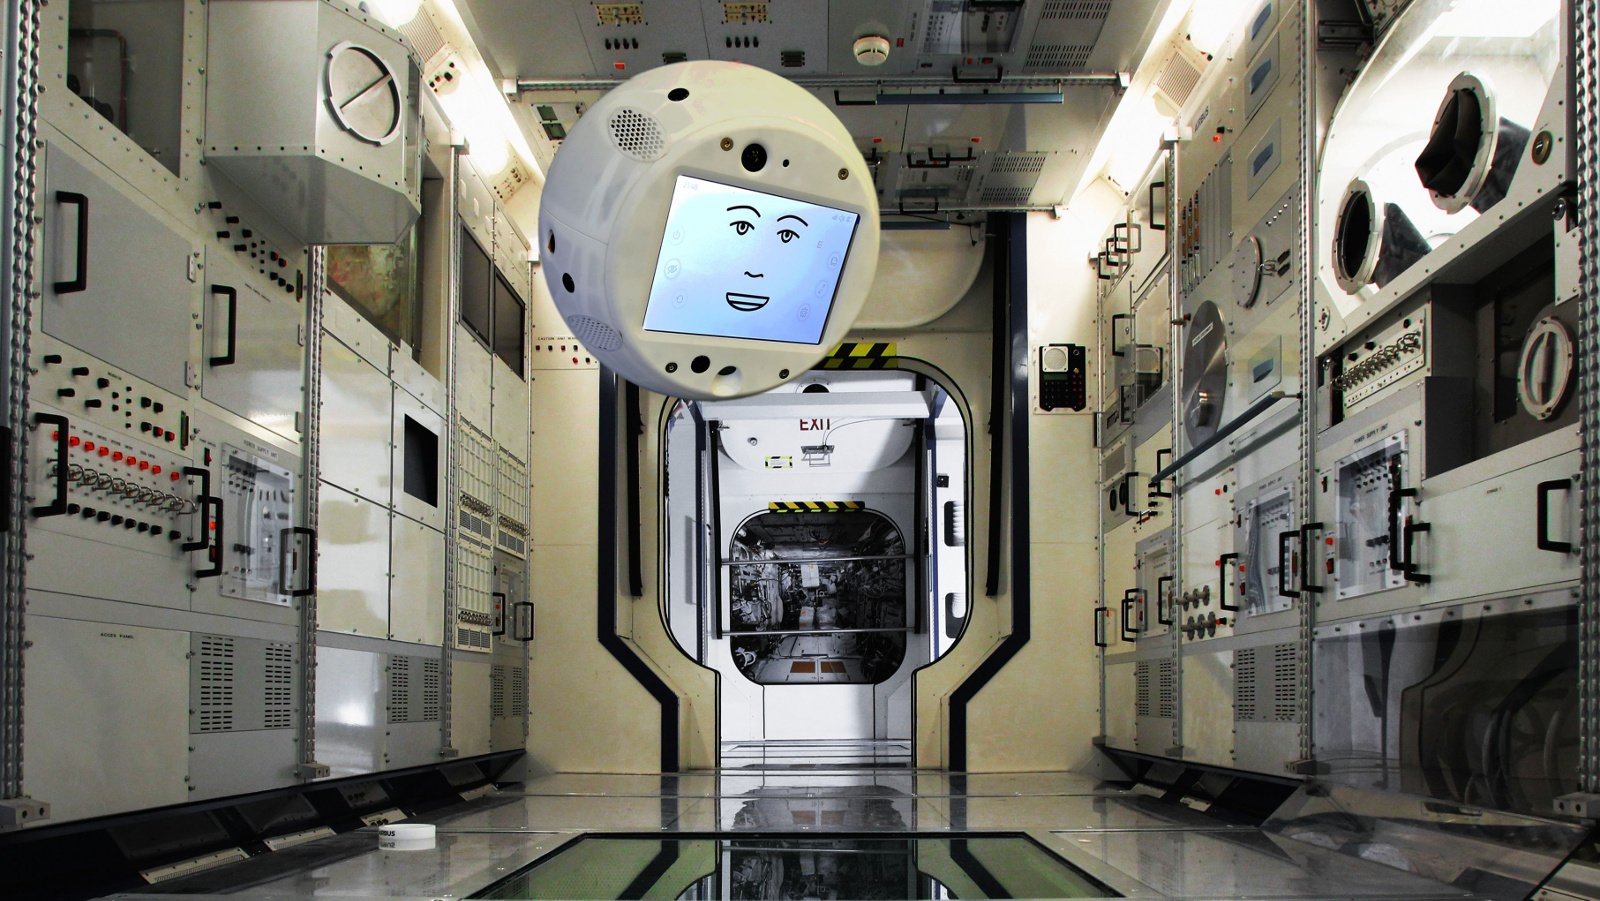 A new member of the crew of the ISS will be flying robot with artificial intelligence